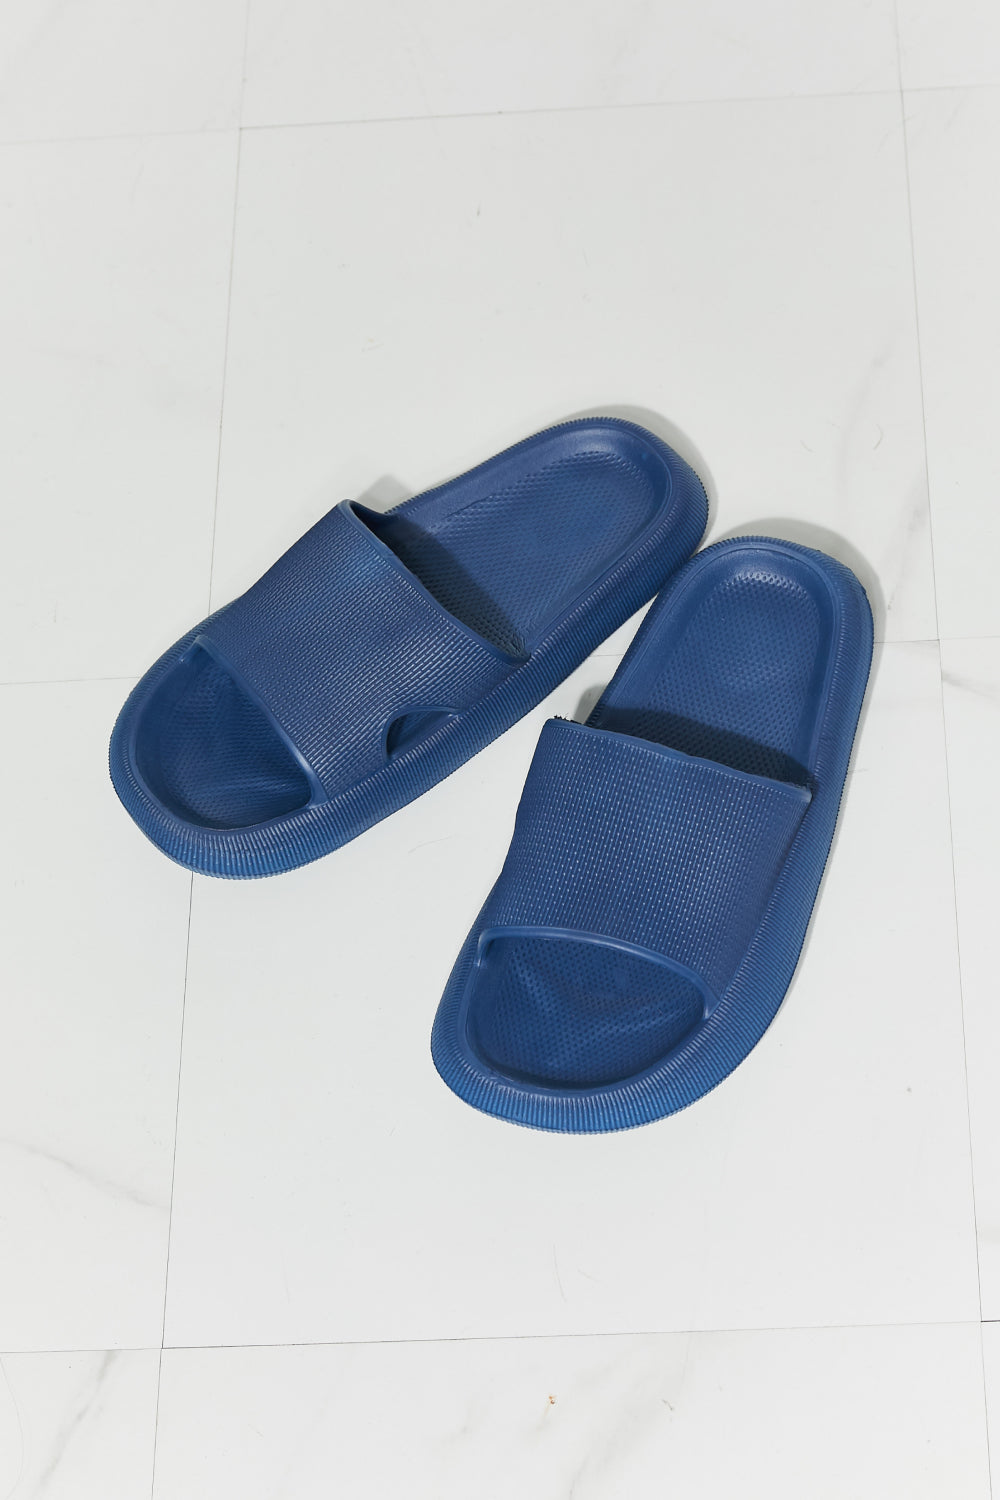 🇺🇸 Arms Around Me Open Toe Slide in Navy